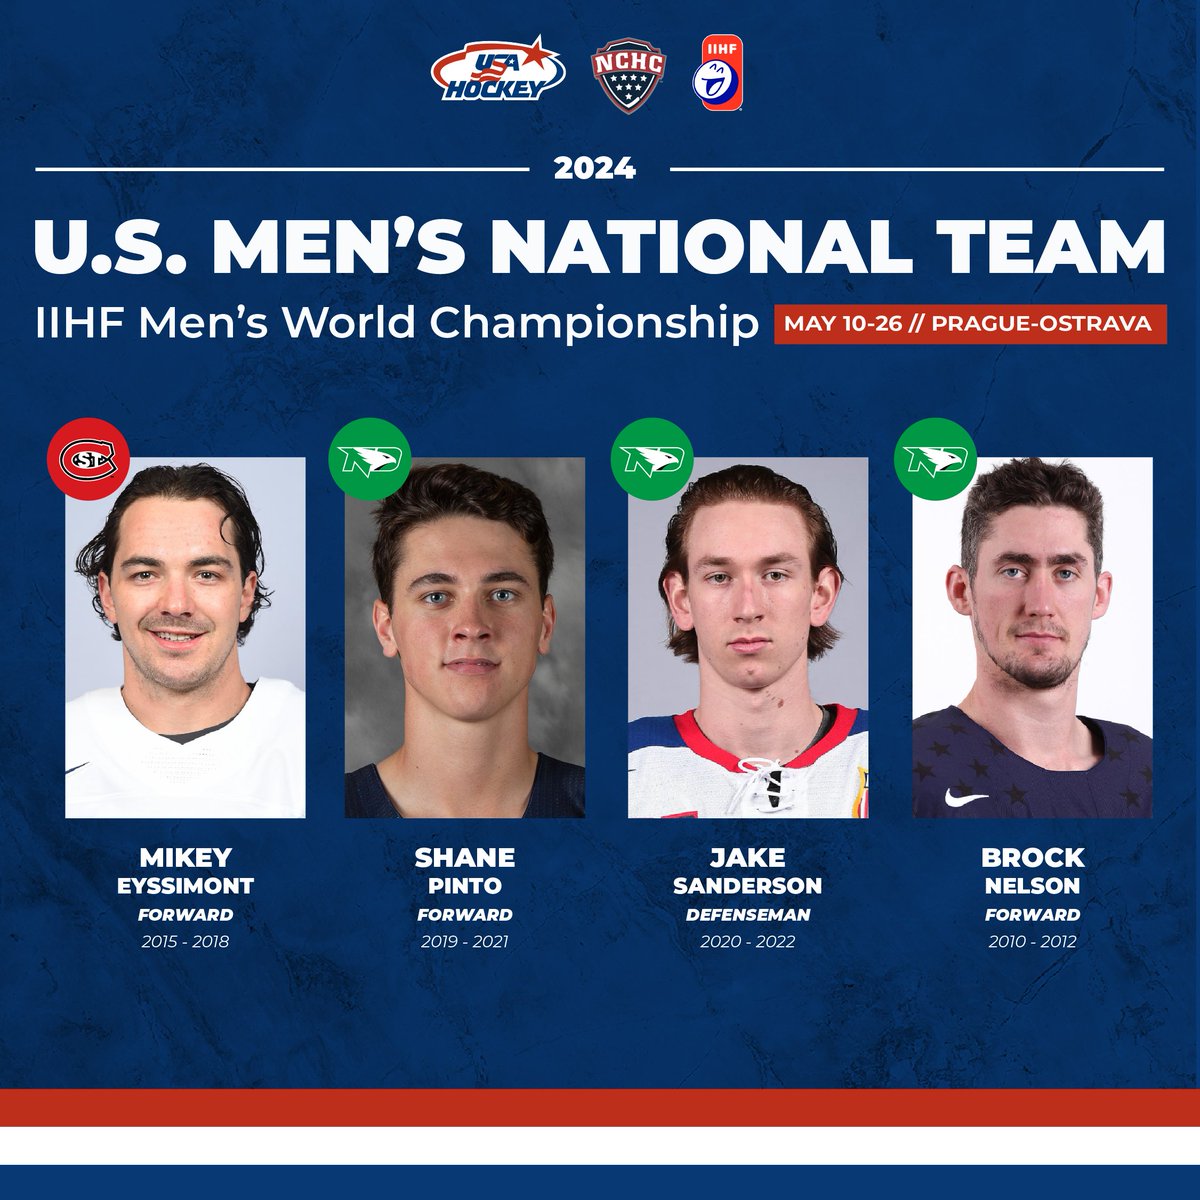 #TeamUSA opens play today and we'll have 4️⃣ alums of #NCHChockey teams represented on @usahockey! 🇺🇸 📰: bit.ly/2024TeamUSA Best of luck to all our alumni participating at 2024 @IIHFHockey #MensWorlds!